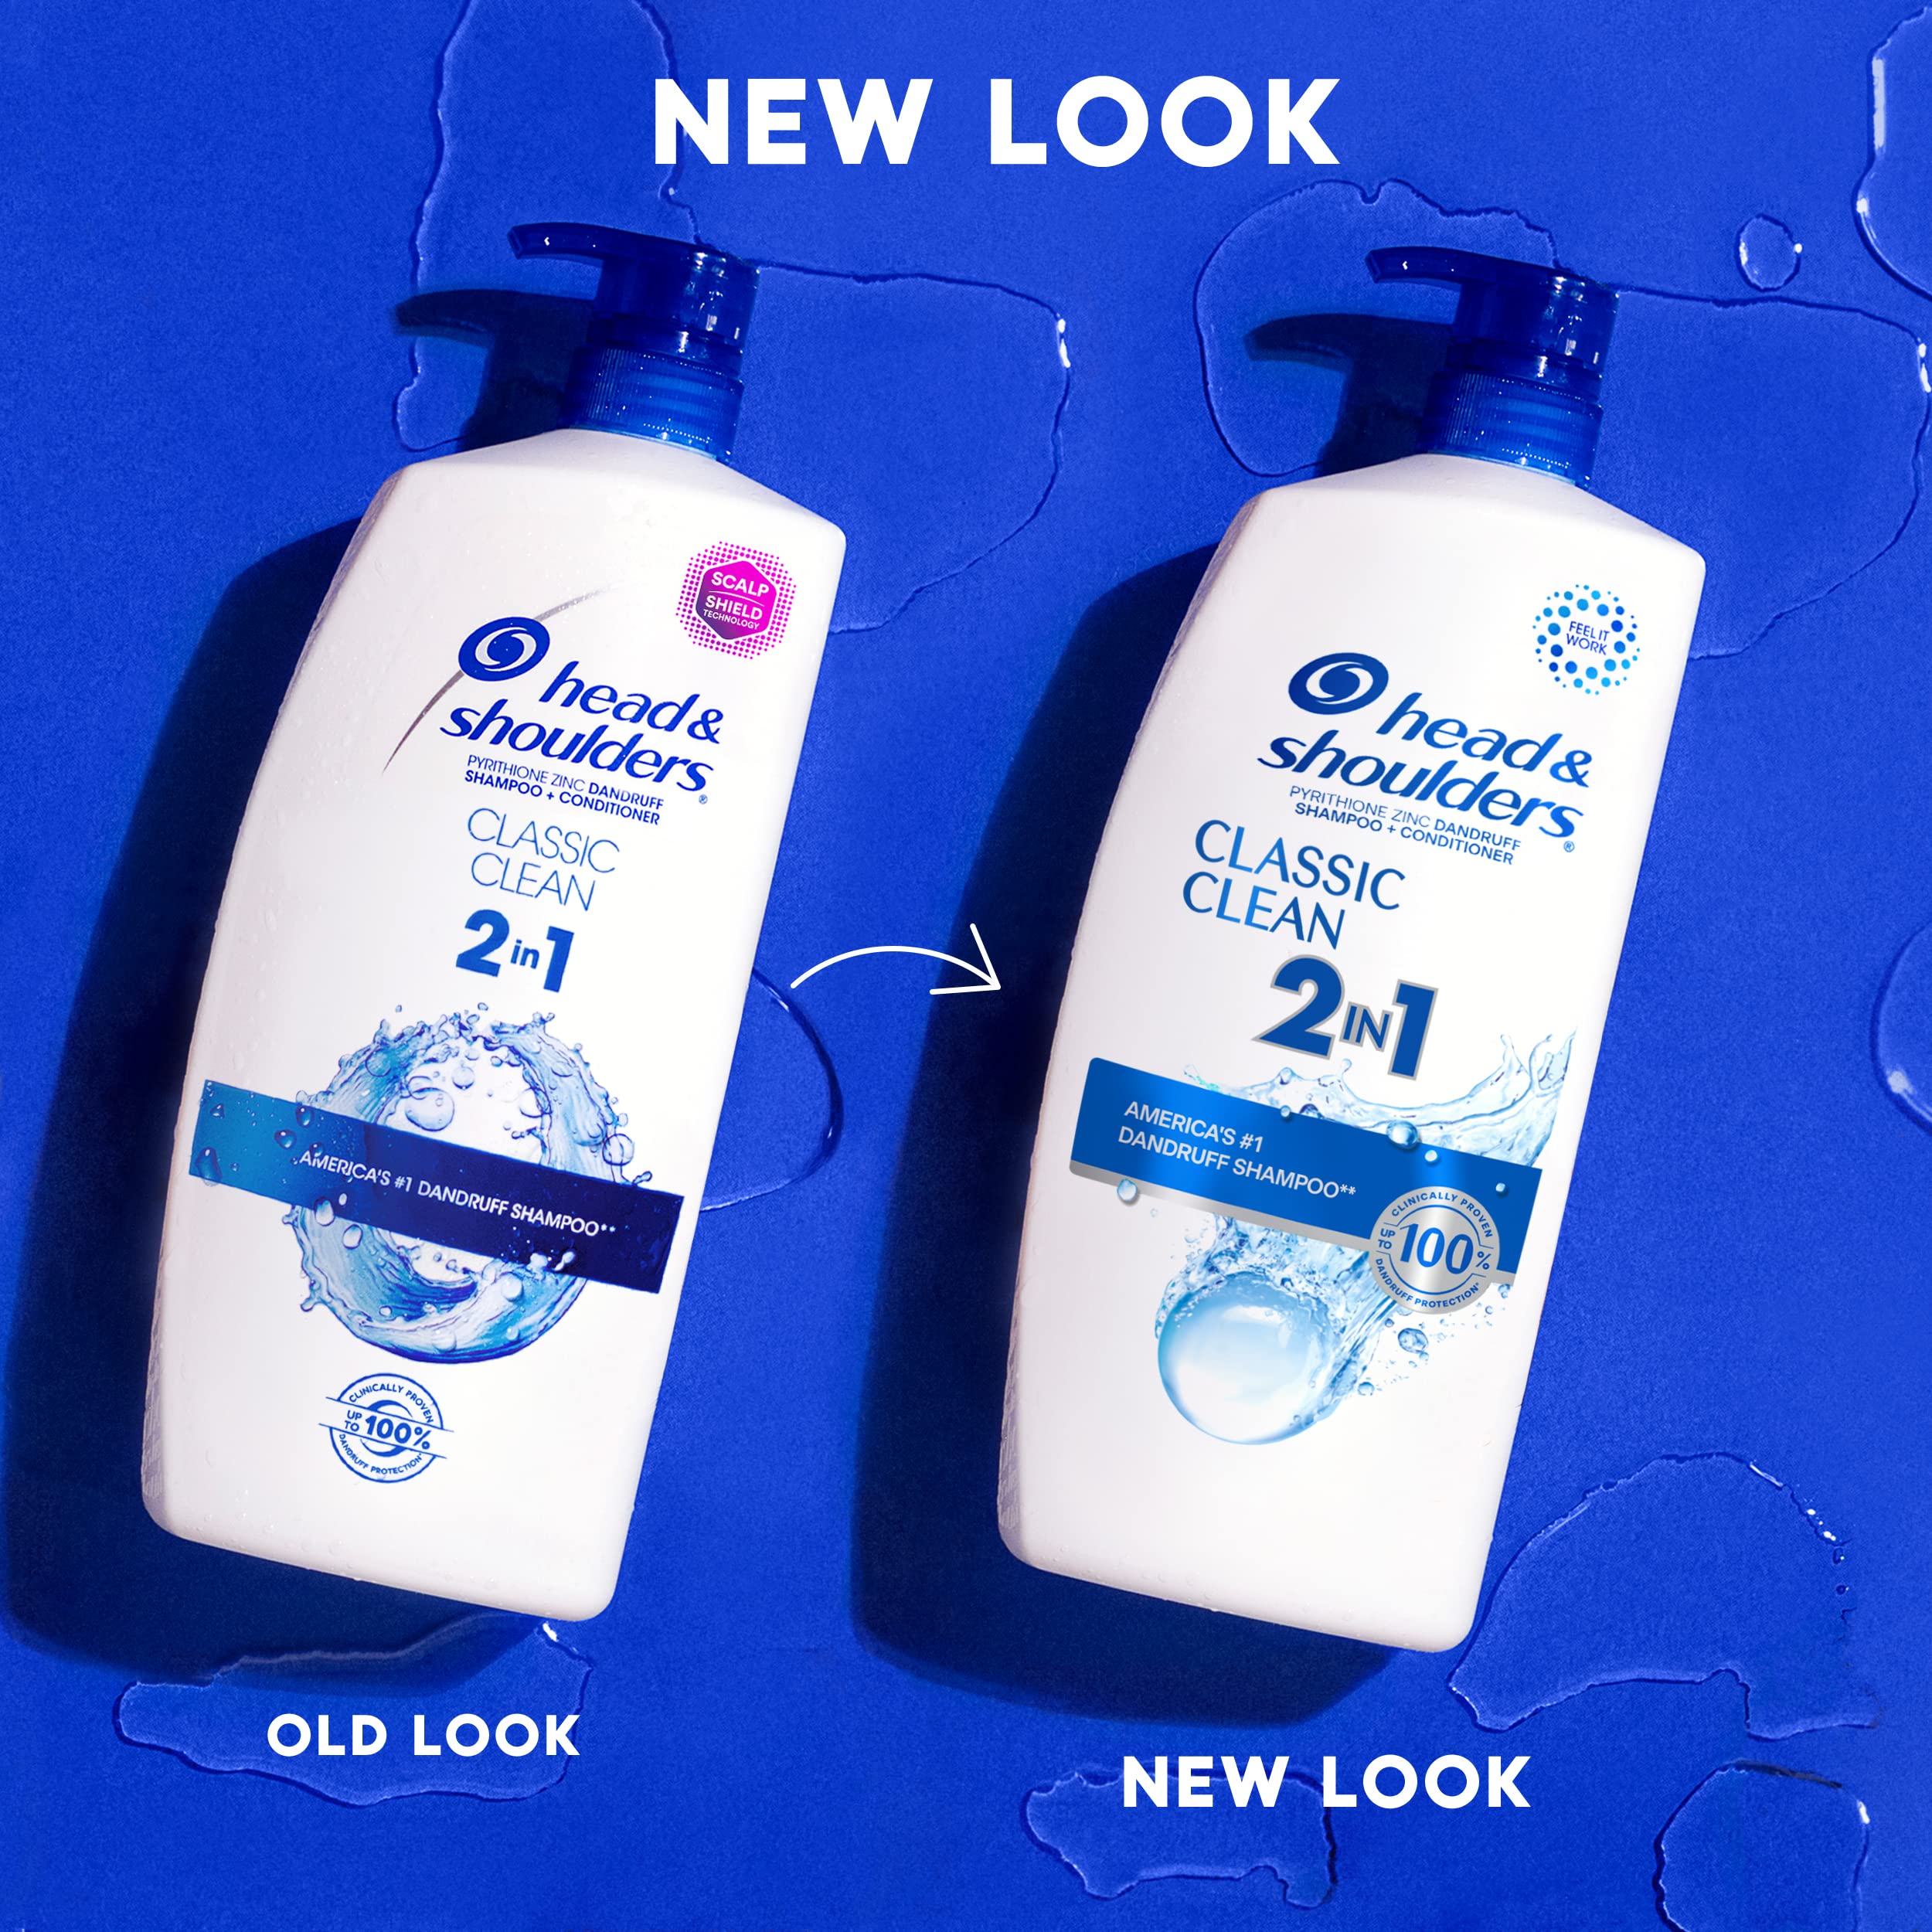 Head and Shoulders Shampoo and Conditioner 2 in 1, Anti Dandruff Treatment & Scalp Care, Classic Clean Scent, for All Hair Types including Color Treated, Curly or Textured Hair, 32.1 fl oz, Twin Pack